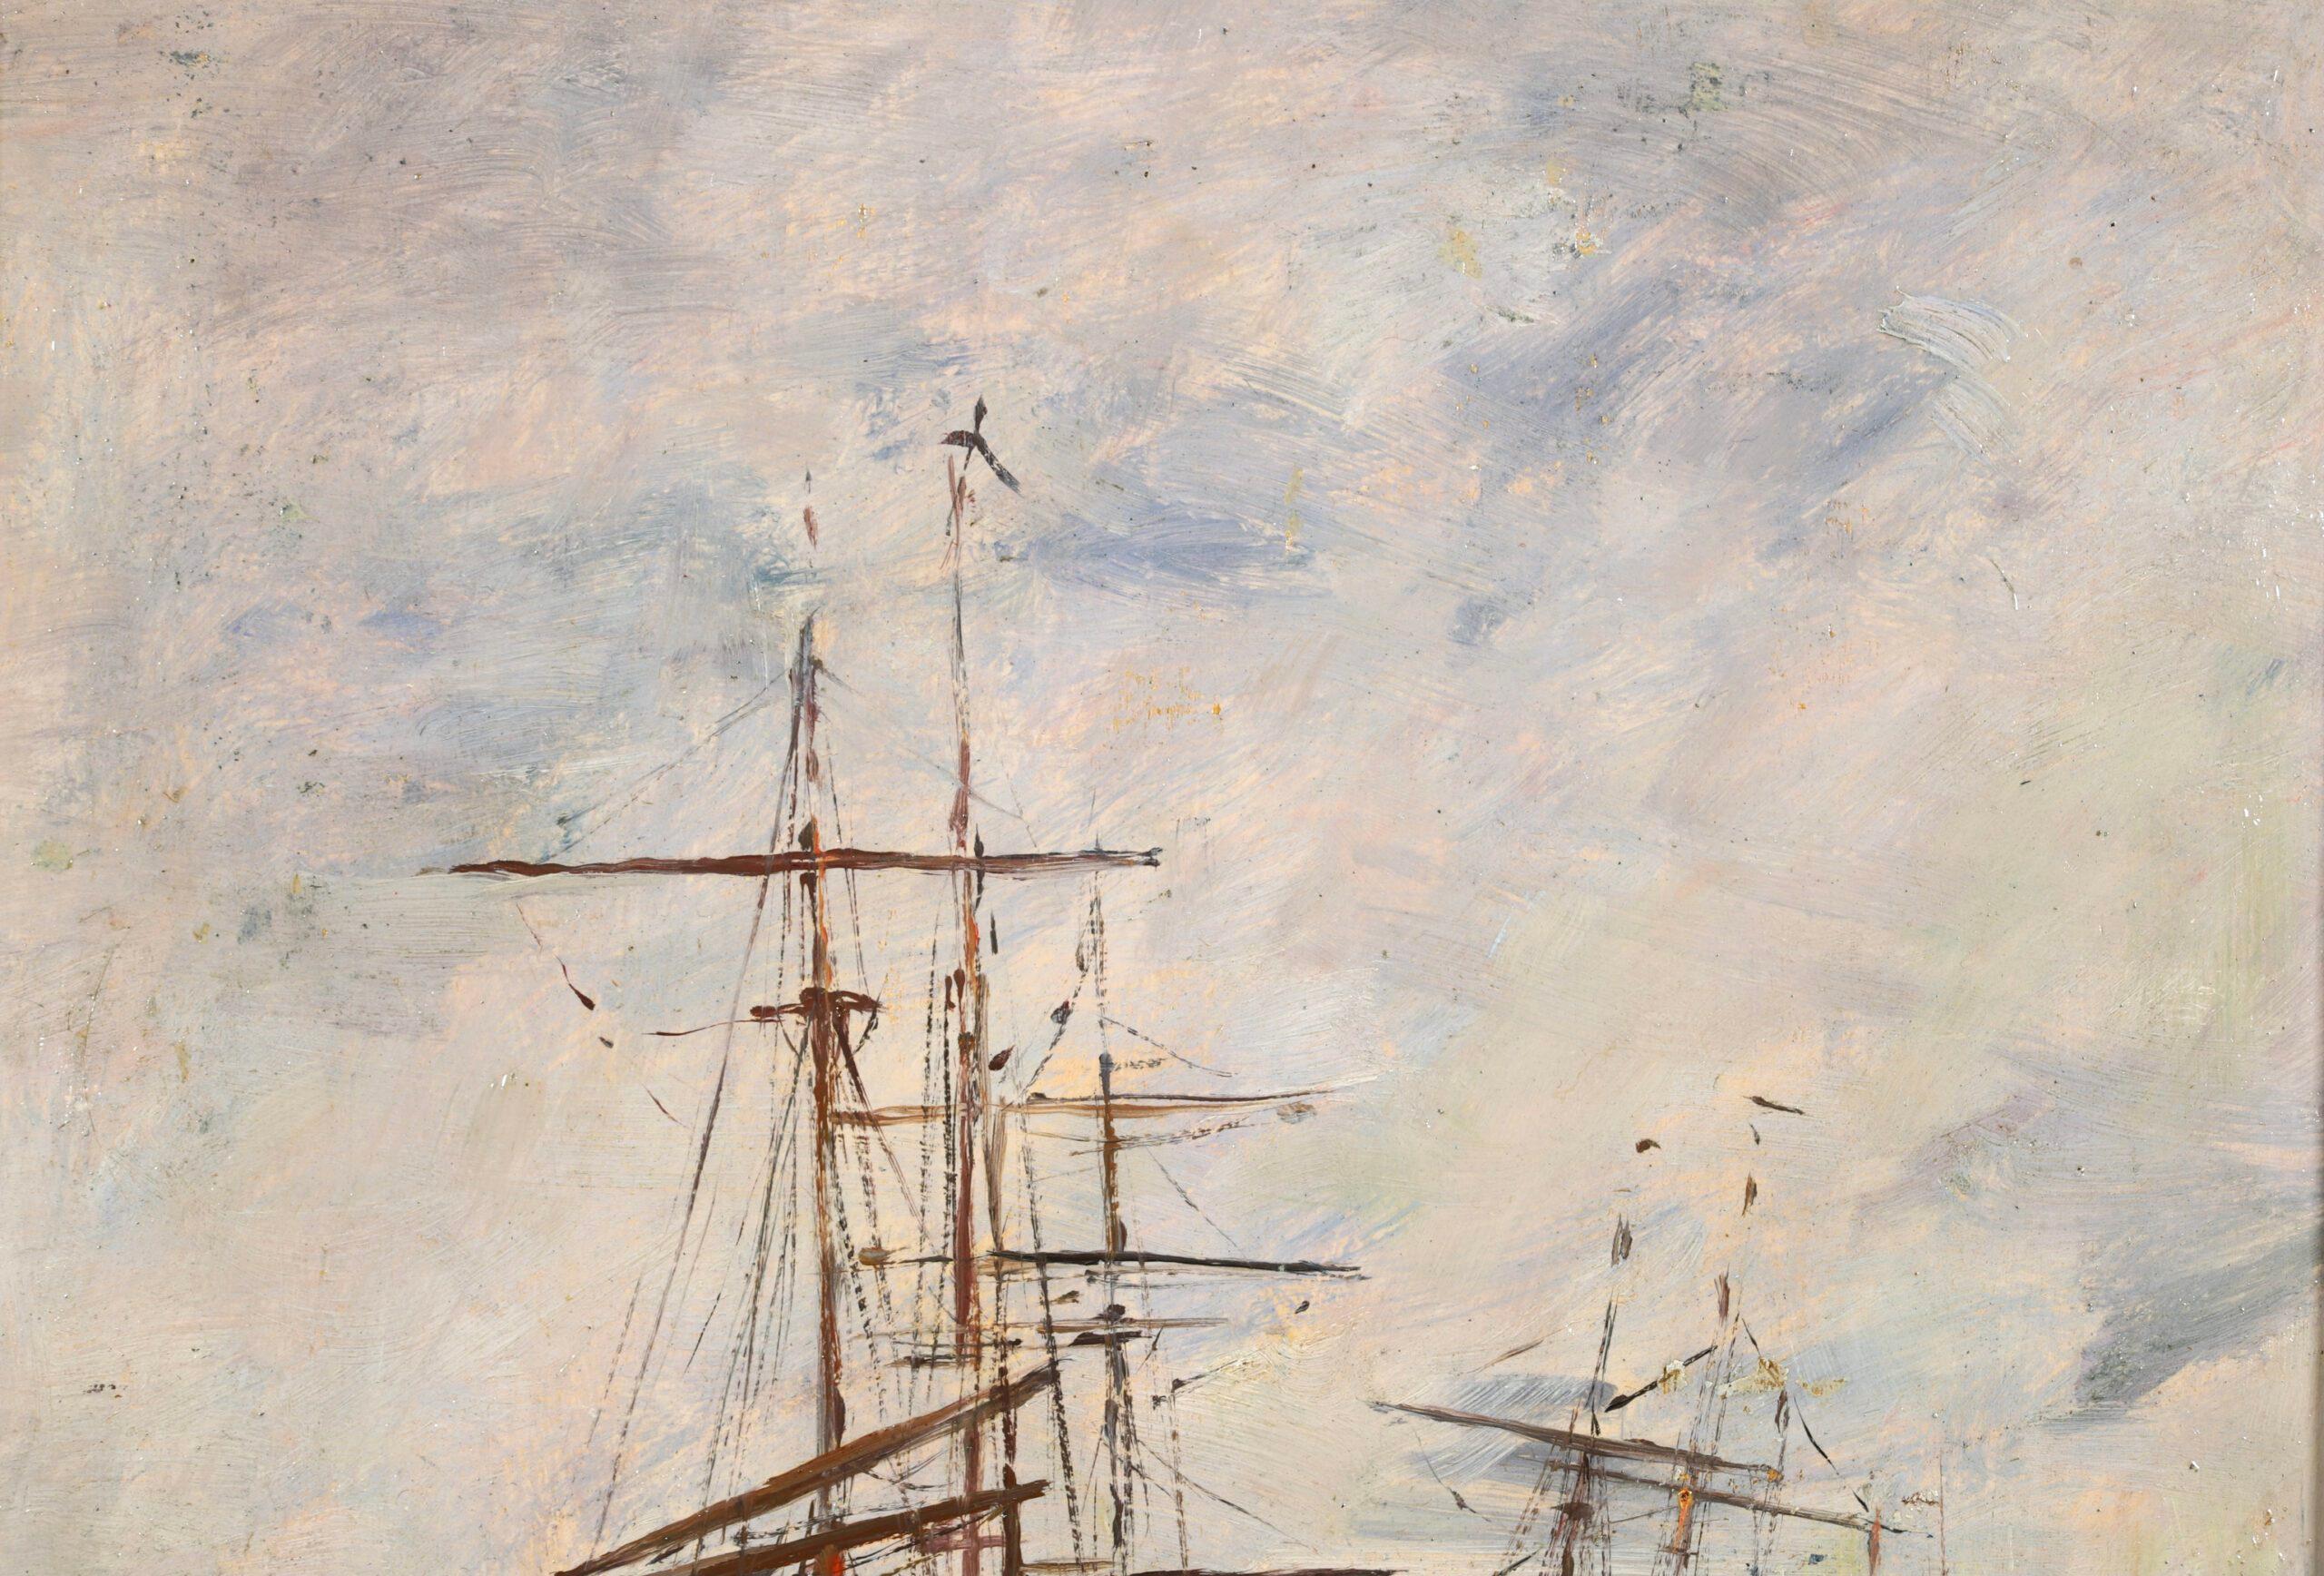 Signed, titled and dated oil on panel landscape by French impressionist painter Eugene Boudin. The work depicts sailing boats anchored at a port in Venice, Italy. The tall masts of the ships are set against the blue of the sky.

Signature:
Signed,